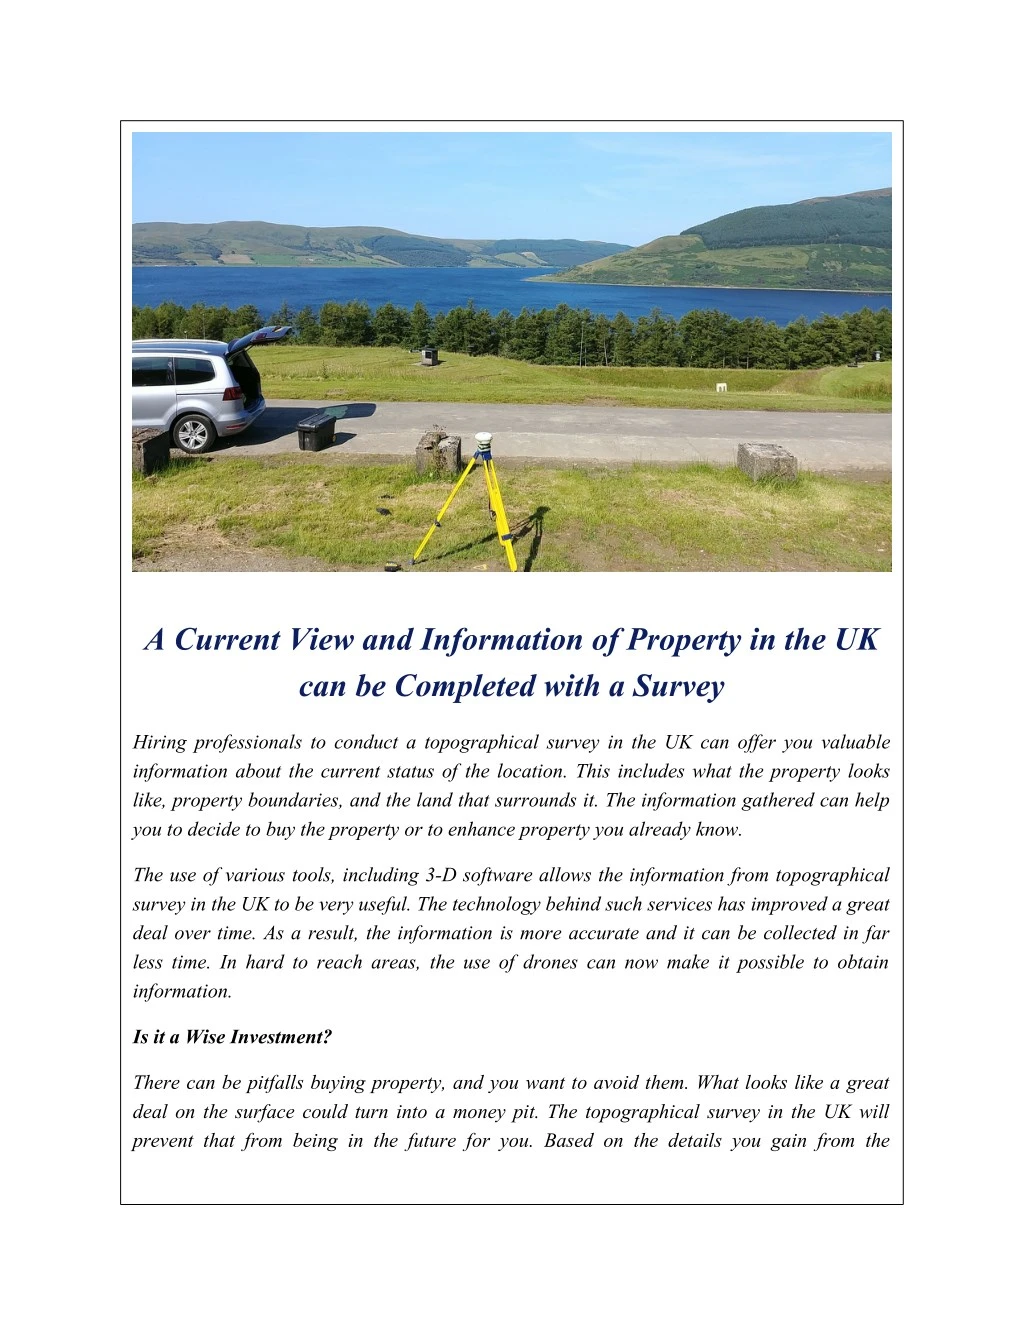 a current view and information of property